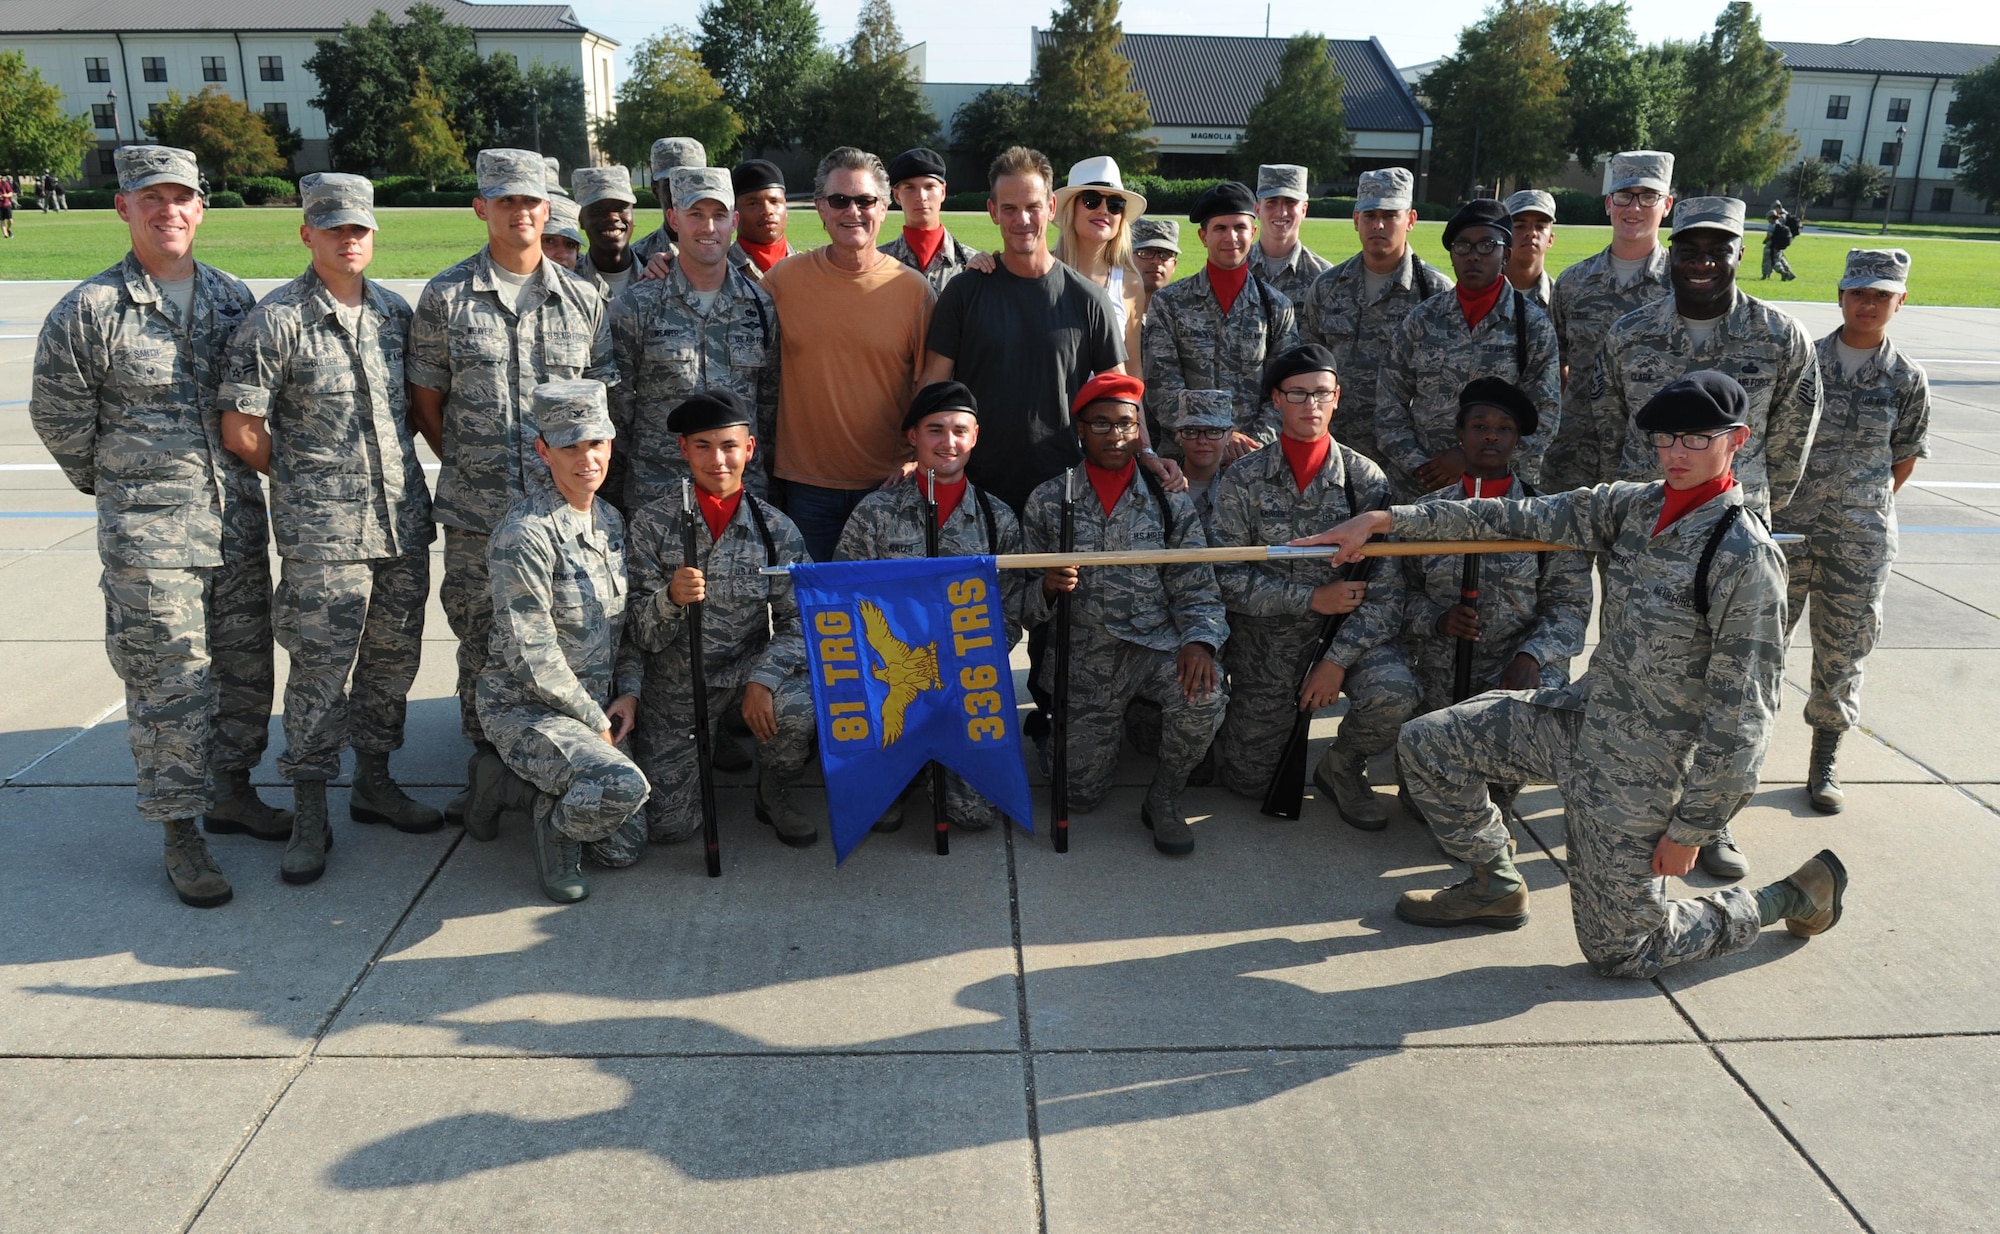 Kurt Russell, Kate Hudson, Deepwater Horizon actors, and Peter Berg, Deepwater Horizon director, pose for a photo with 336th Training Squadron drill team members at the Levitow Training Support Facility drill pad before the Deepwater Horizon movie screening Sept. 20, 2016, on Keesler Air Force Base, Miss. Before the screening, Russell, Hudson and Berg, took a short tour of the 81st Training Wing and 403rd Wing to meet with Airmen and learn about their missions at Keesler. (U.S. Air Force photo by Kemberly Groue/Released)